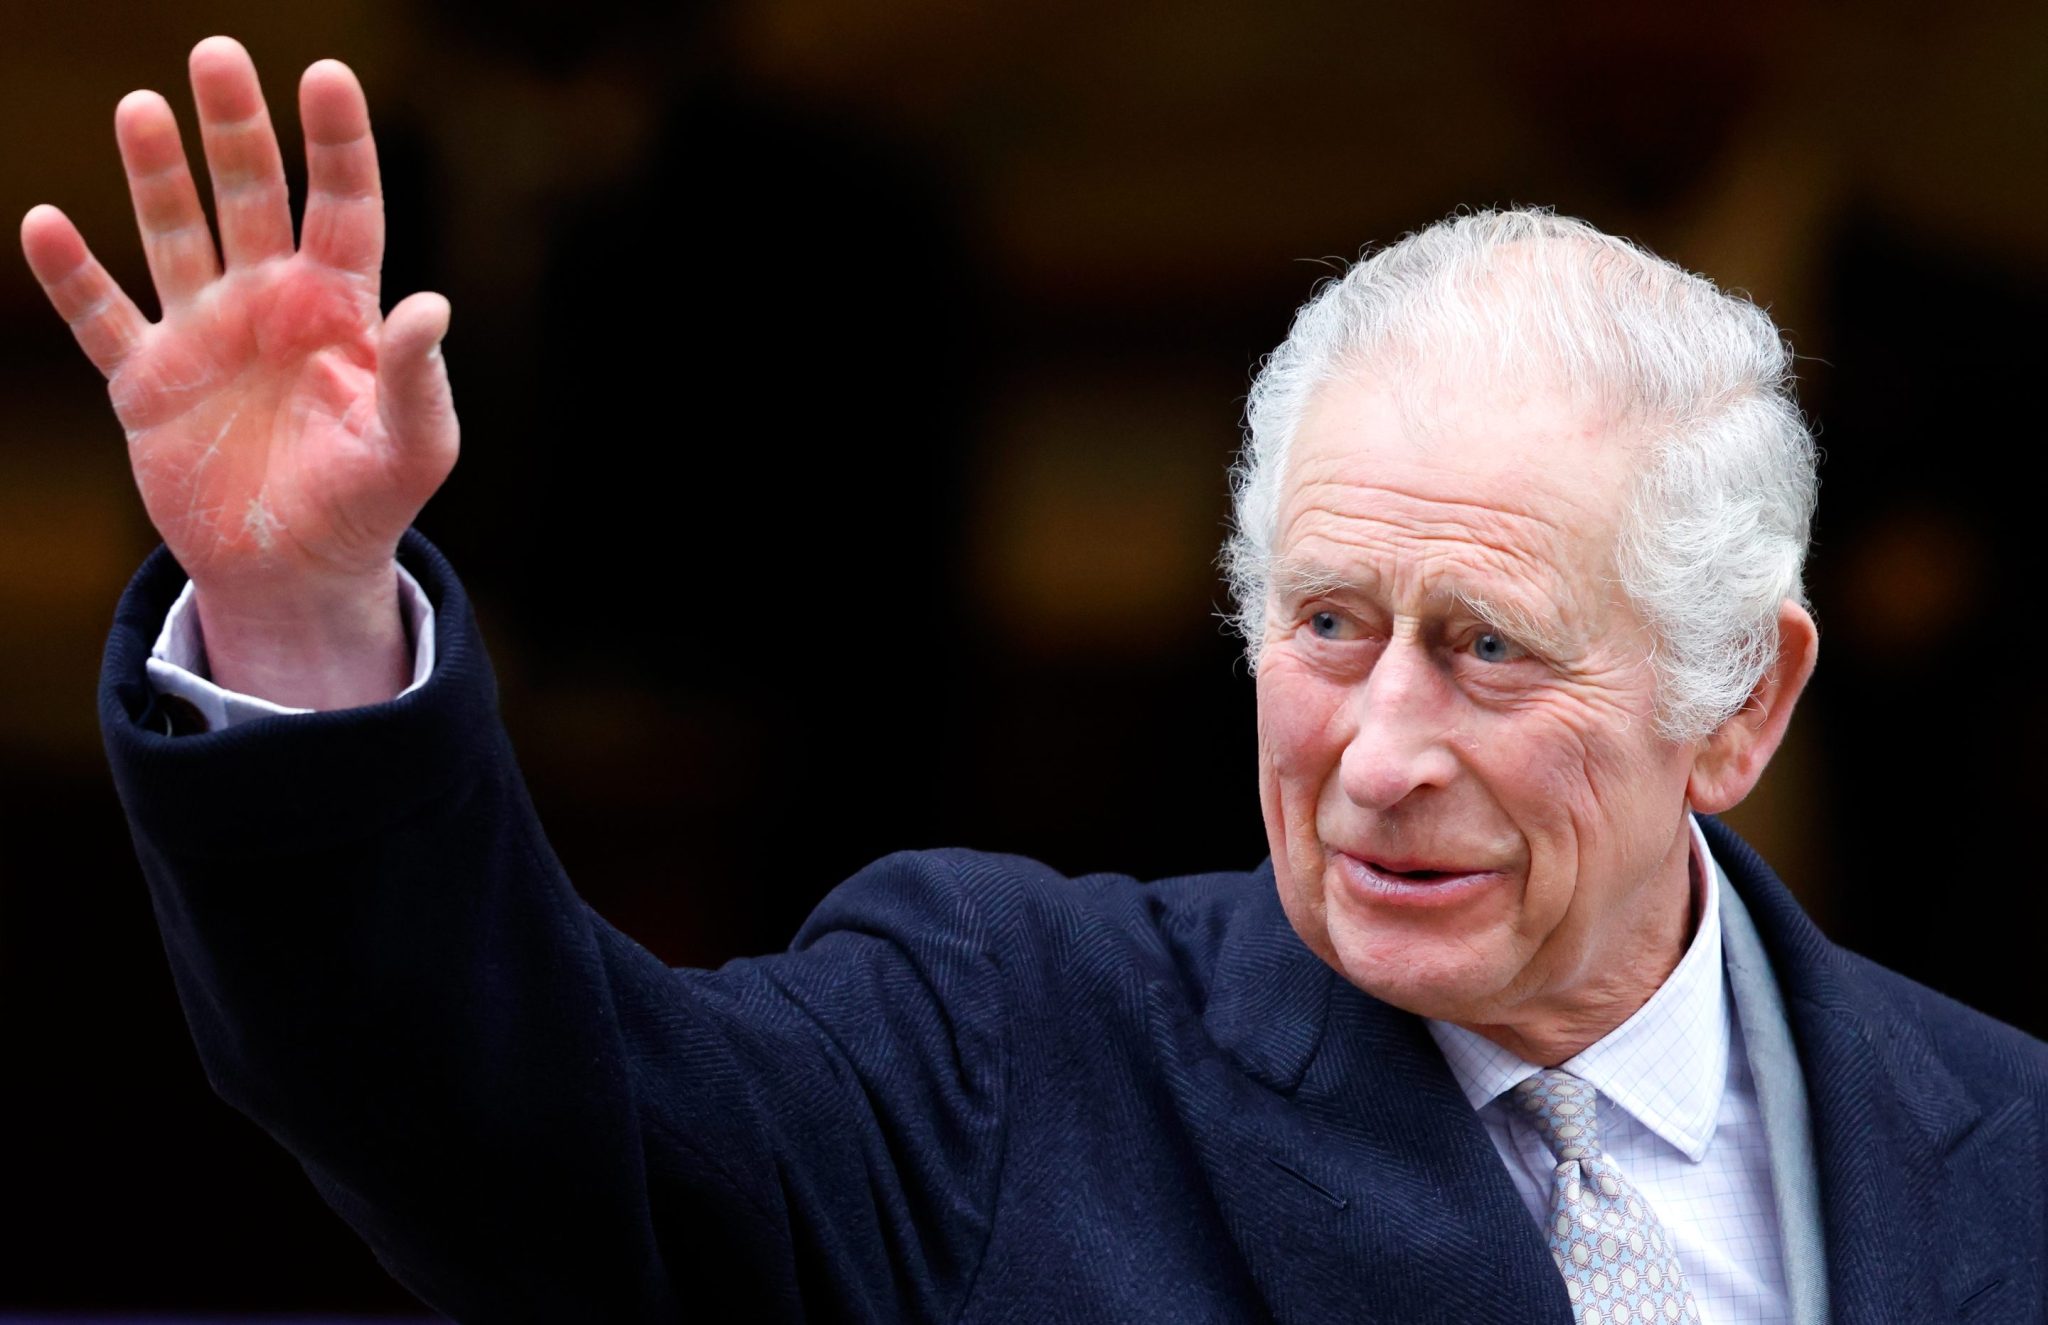 King Charles III has cancer, will step back from public duties